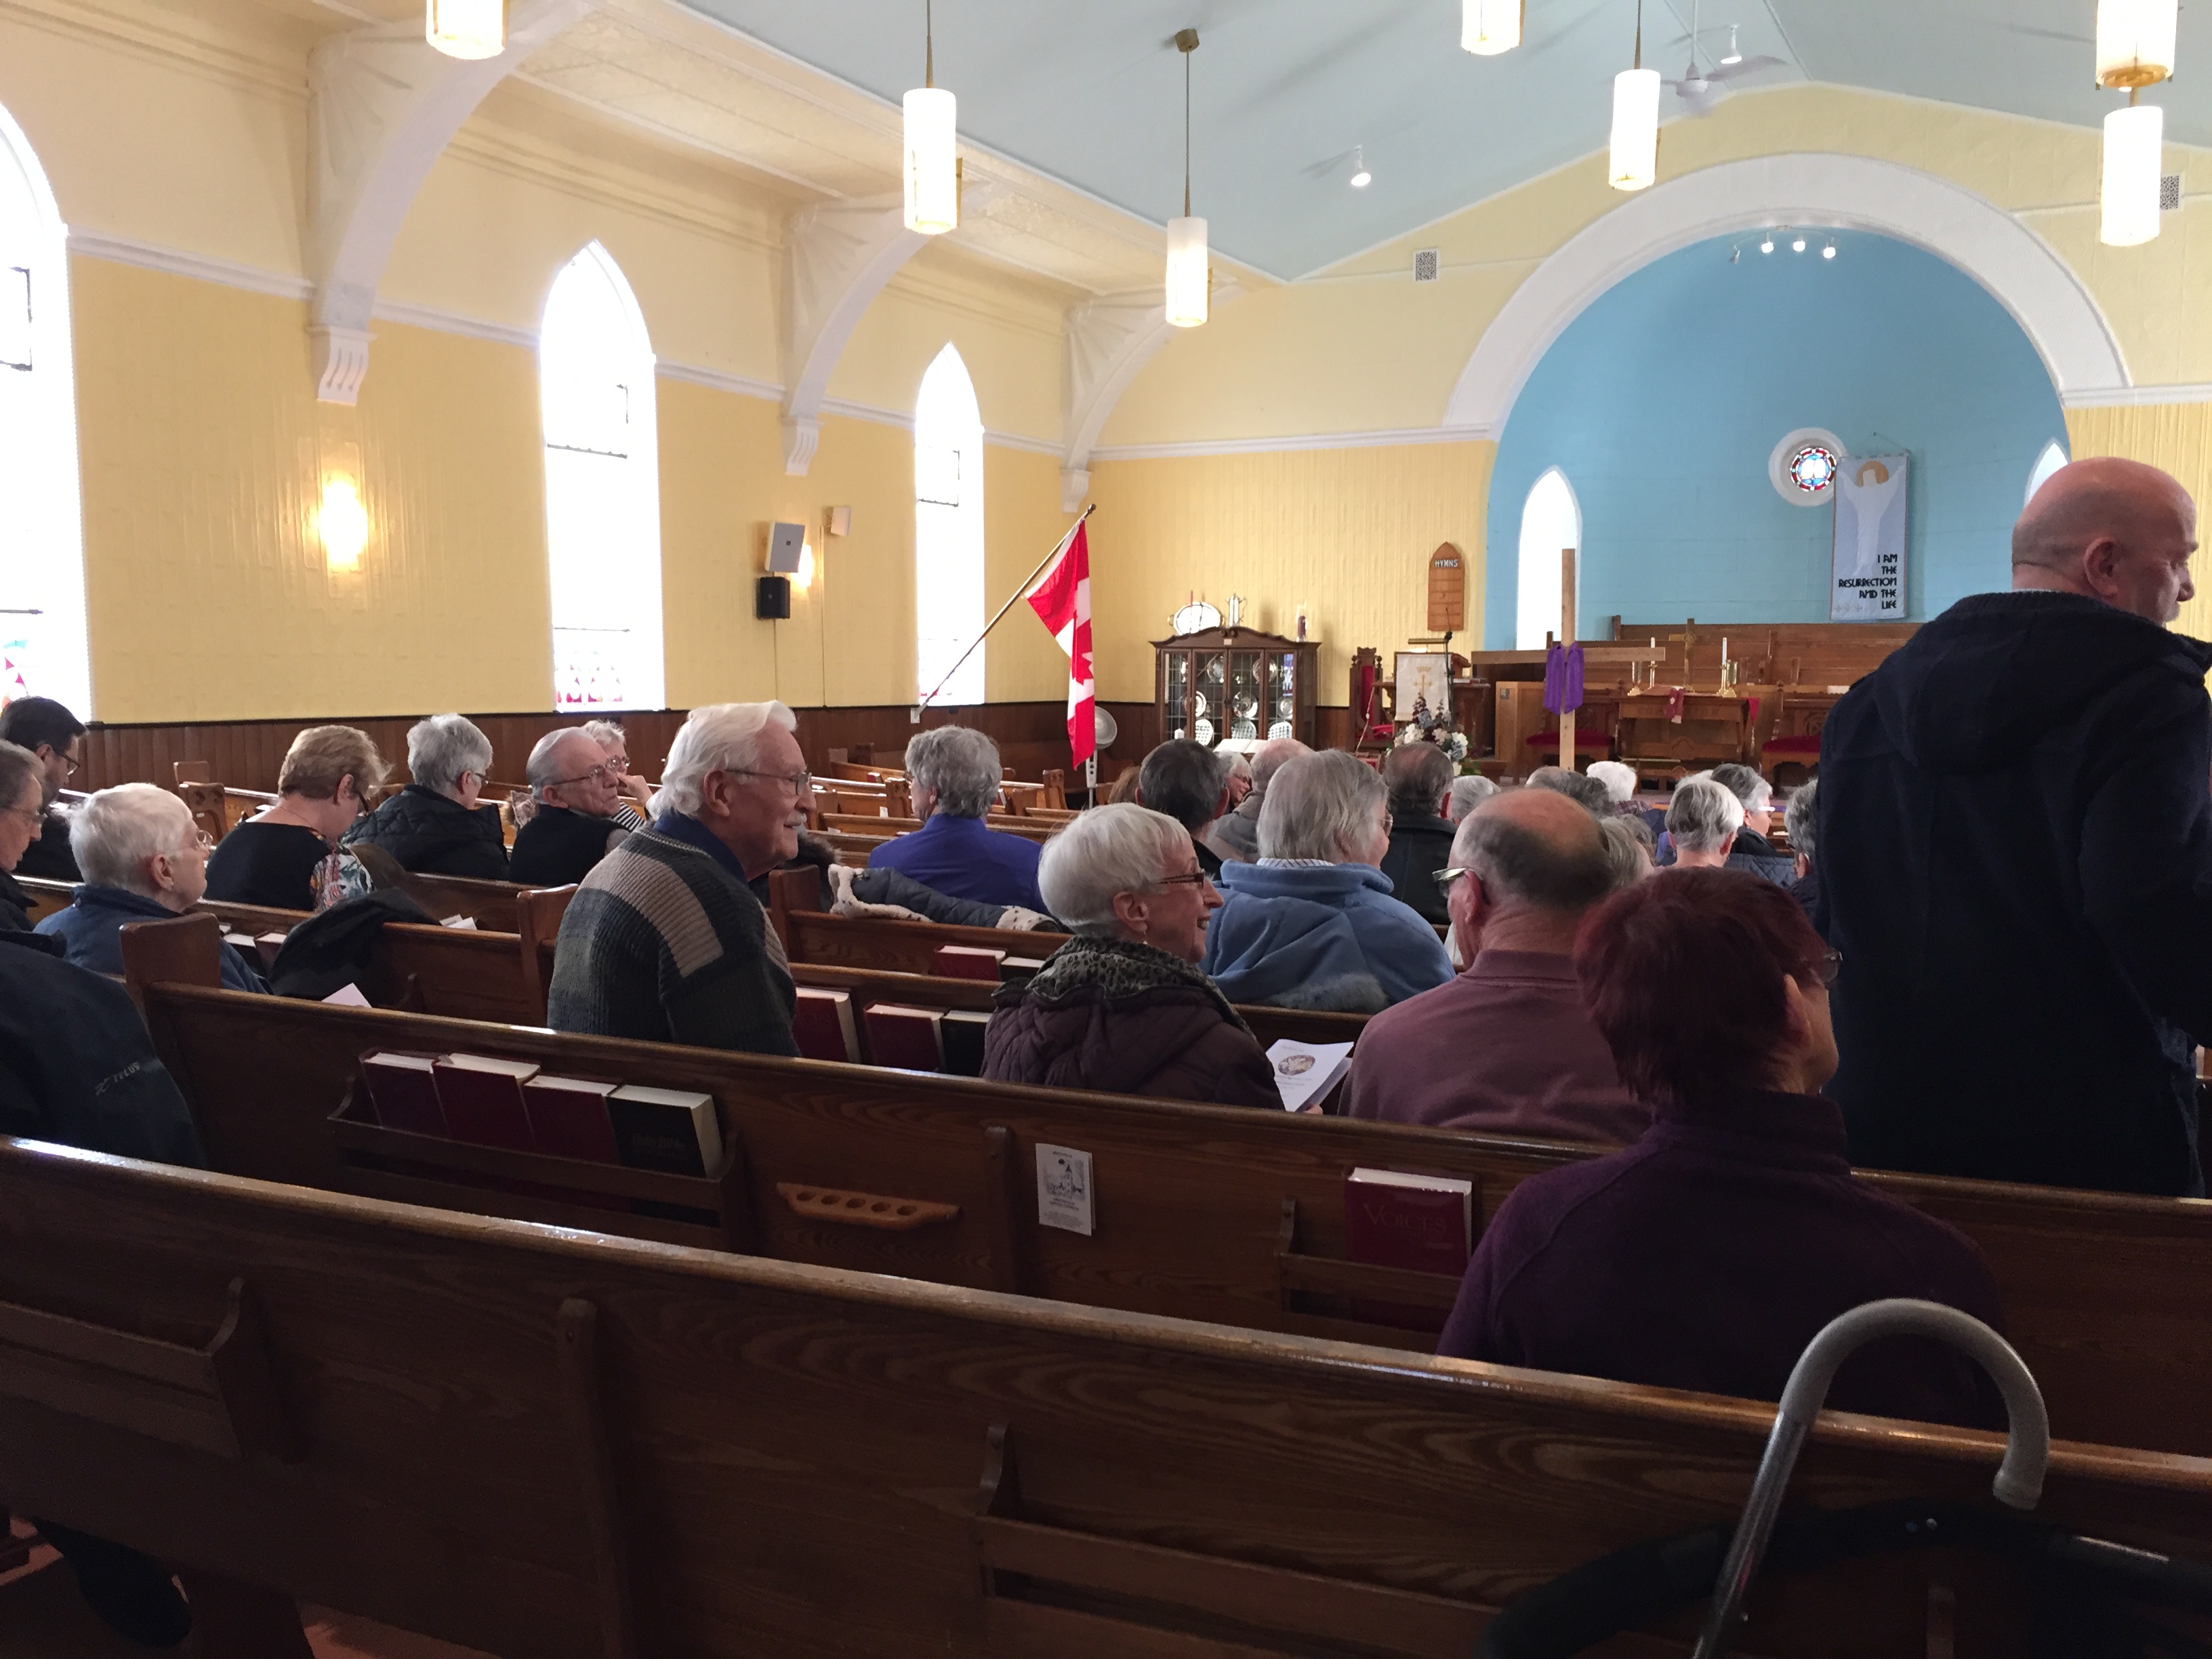 February Sunday services are at 10 a.m. in Smithfield